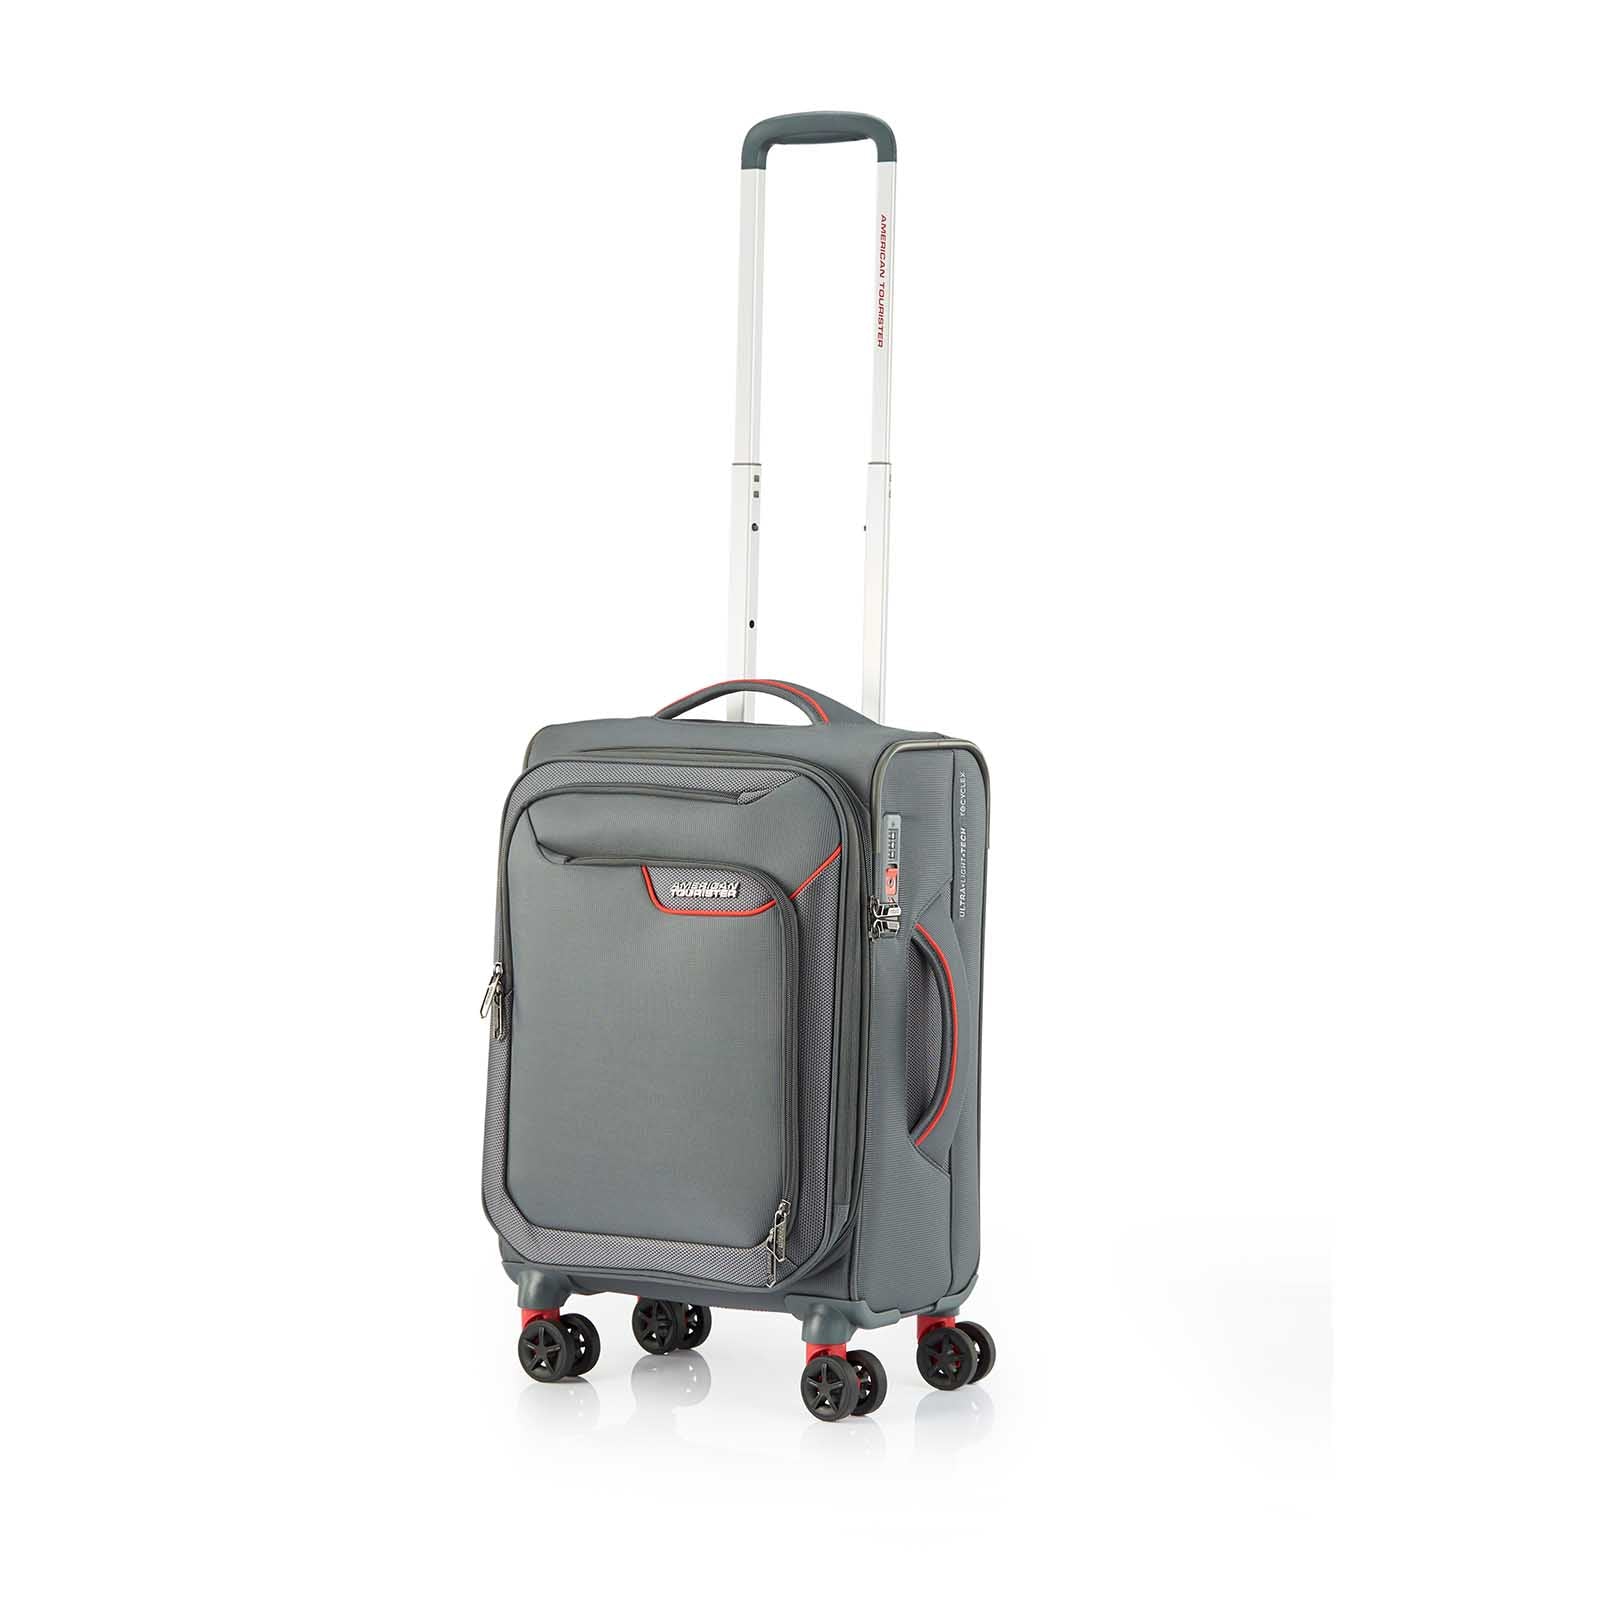 American-Tourister-Applite-4-Eco-55cm-Carry-On-Suitcase-Grey-Red-Front-Angle